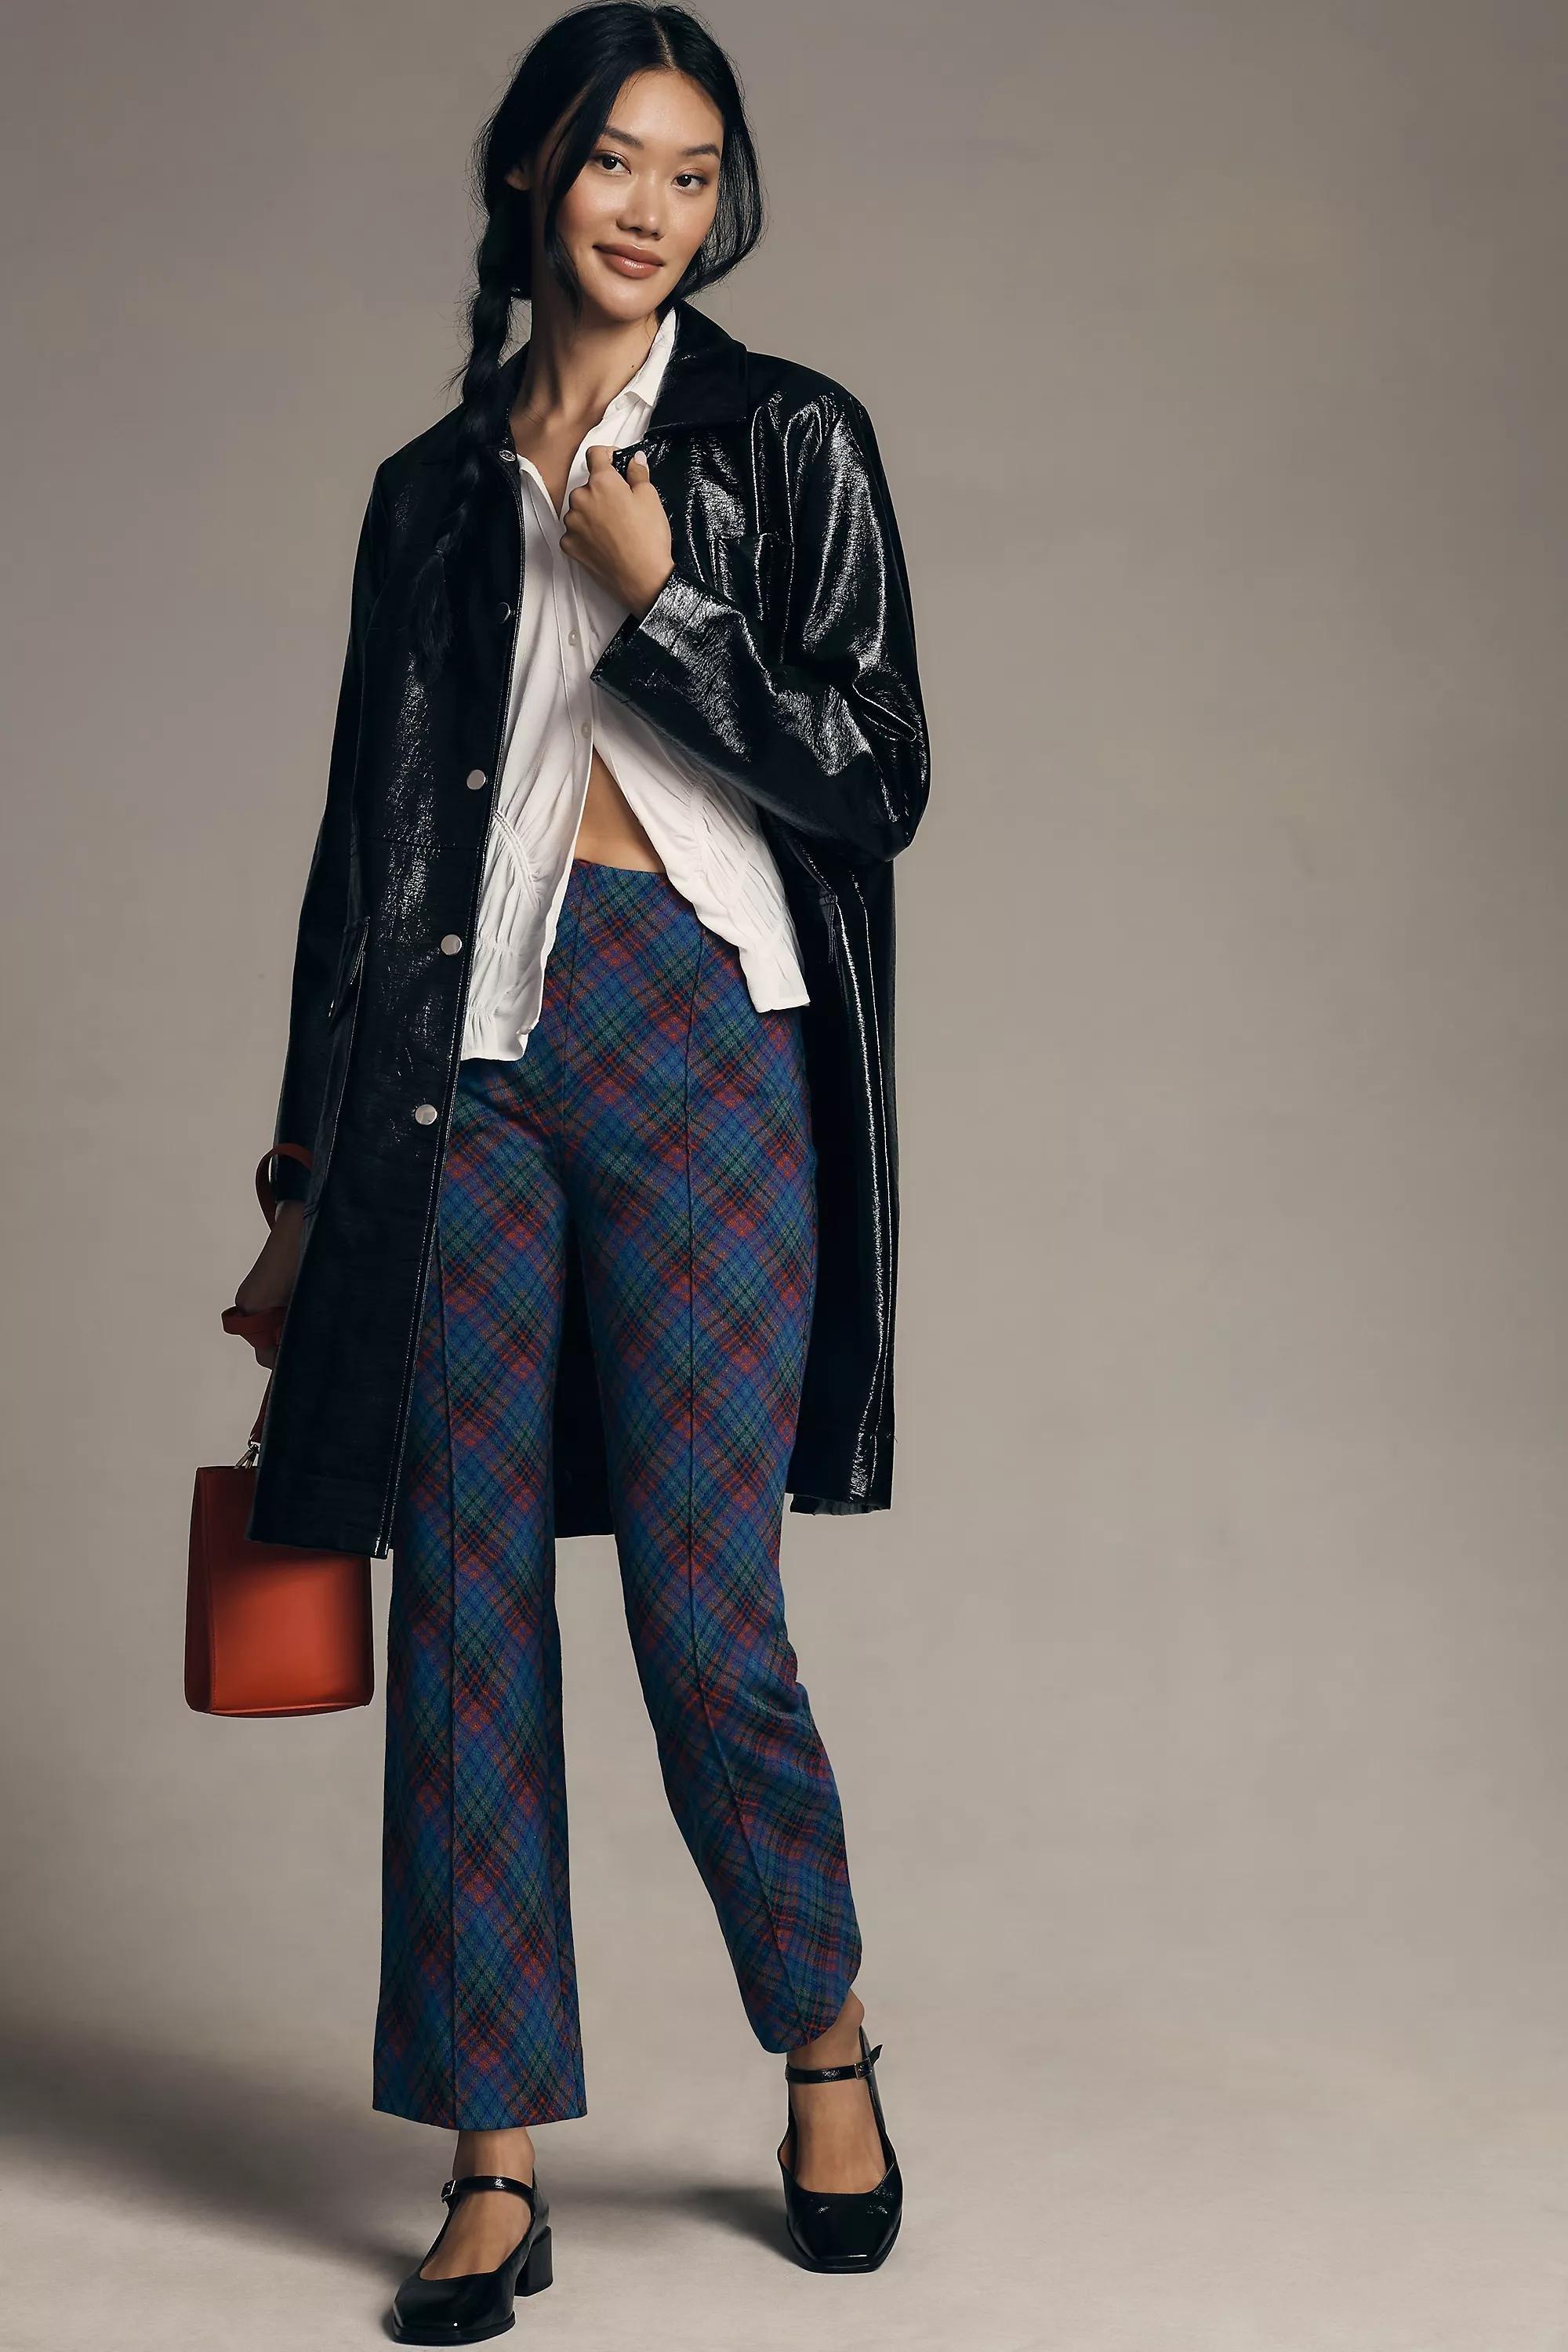 Anthropologie - Motif The Margot Kick-Flare Cropped Trousers By Maeve: Plaid Edition, Multicolour